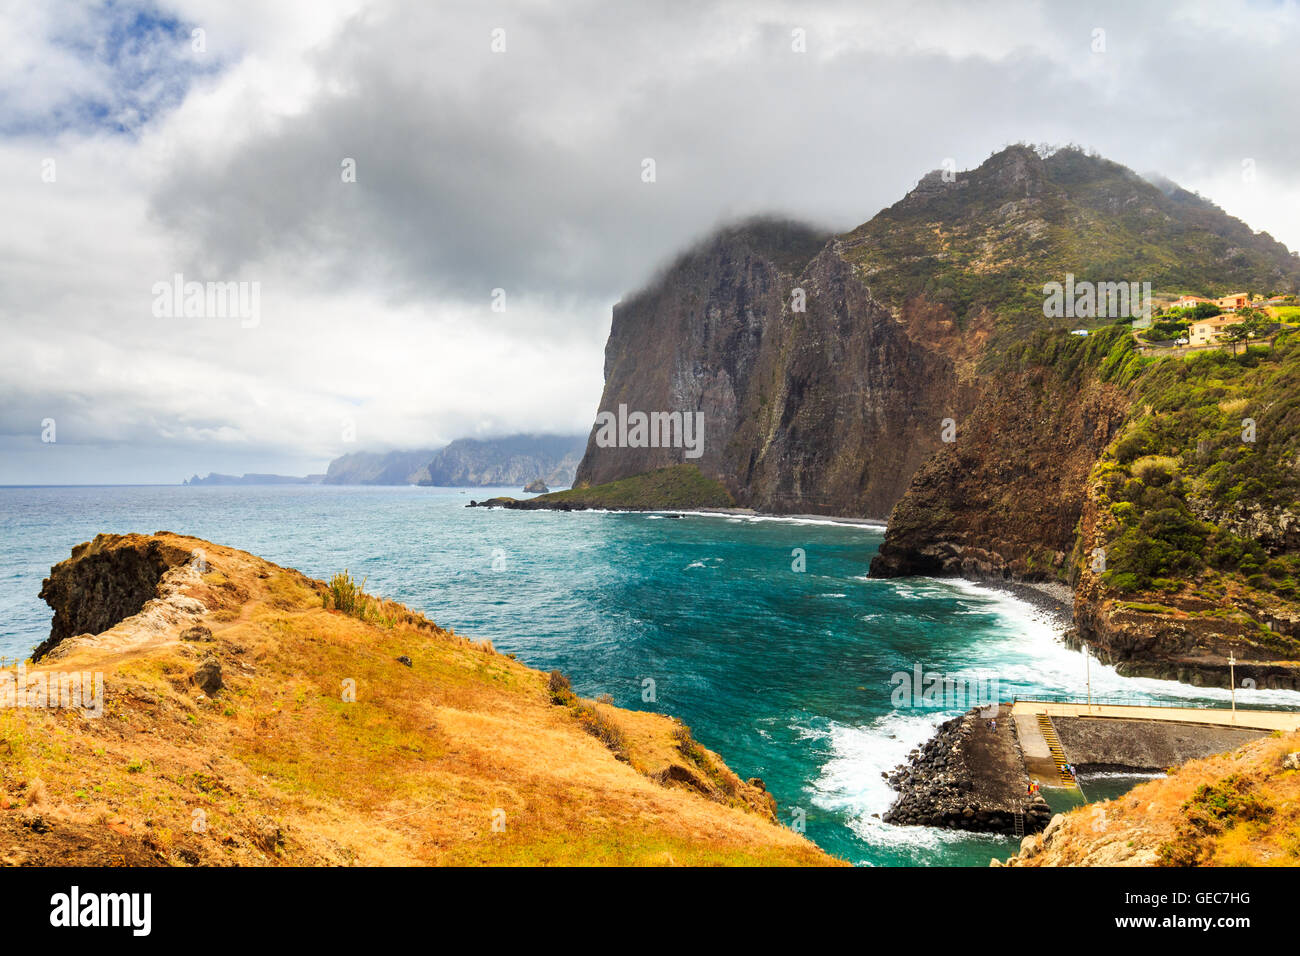 Amazing view of mountains and ocean on the northern coast of Madeira near Boaventura, Portugal Stock Photo